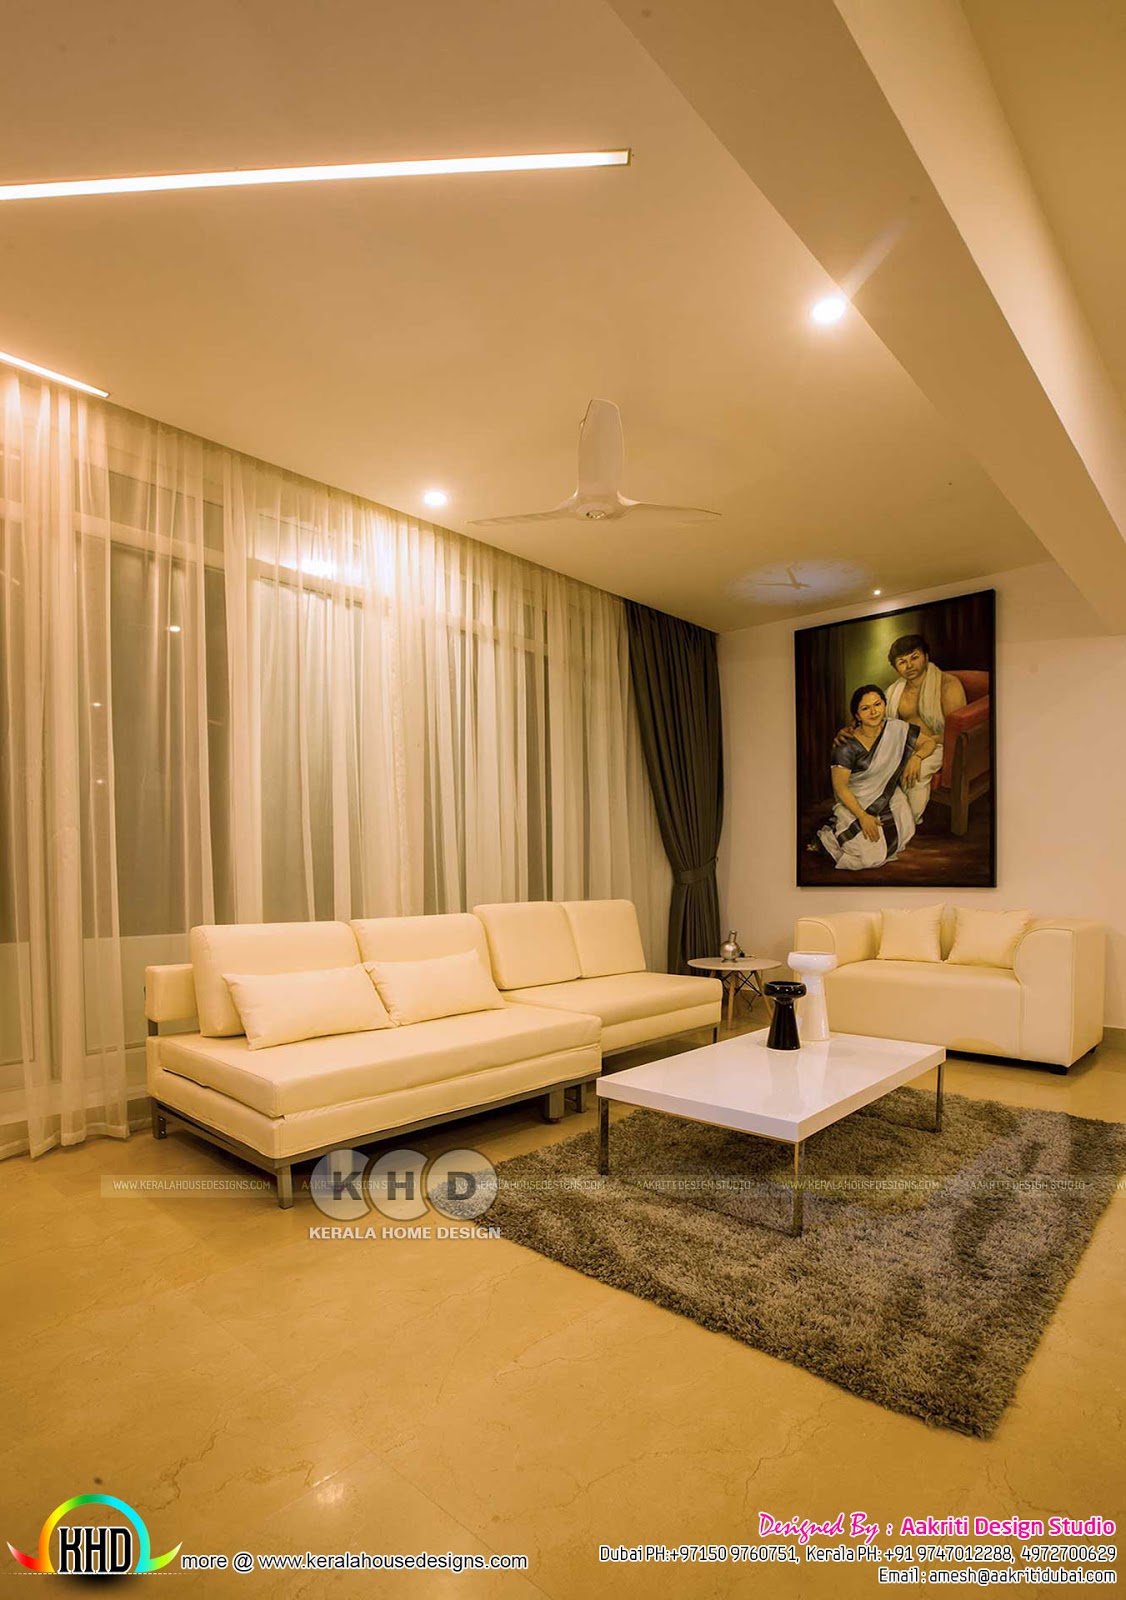 Creatice Home Interior Design Pictures Kerala for Living room